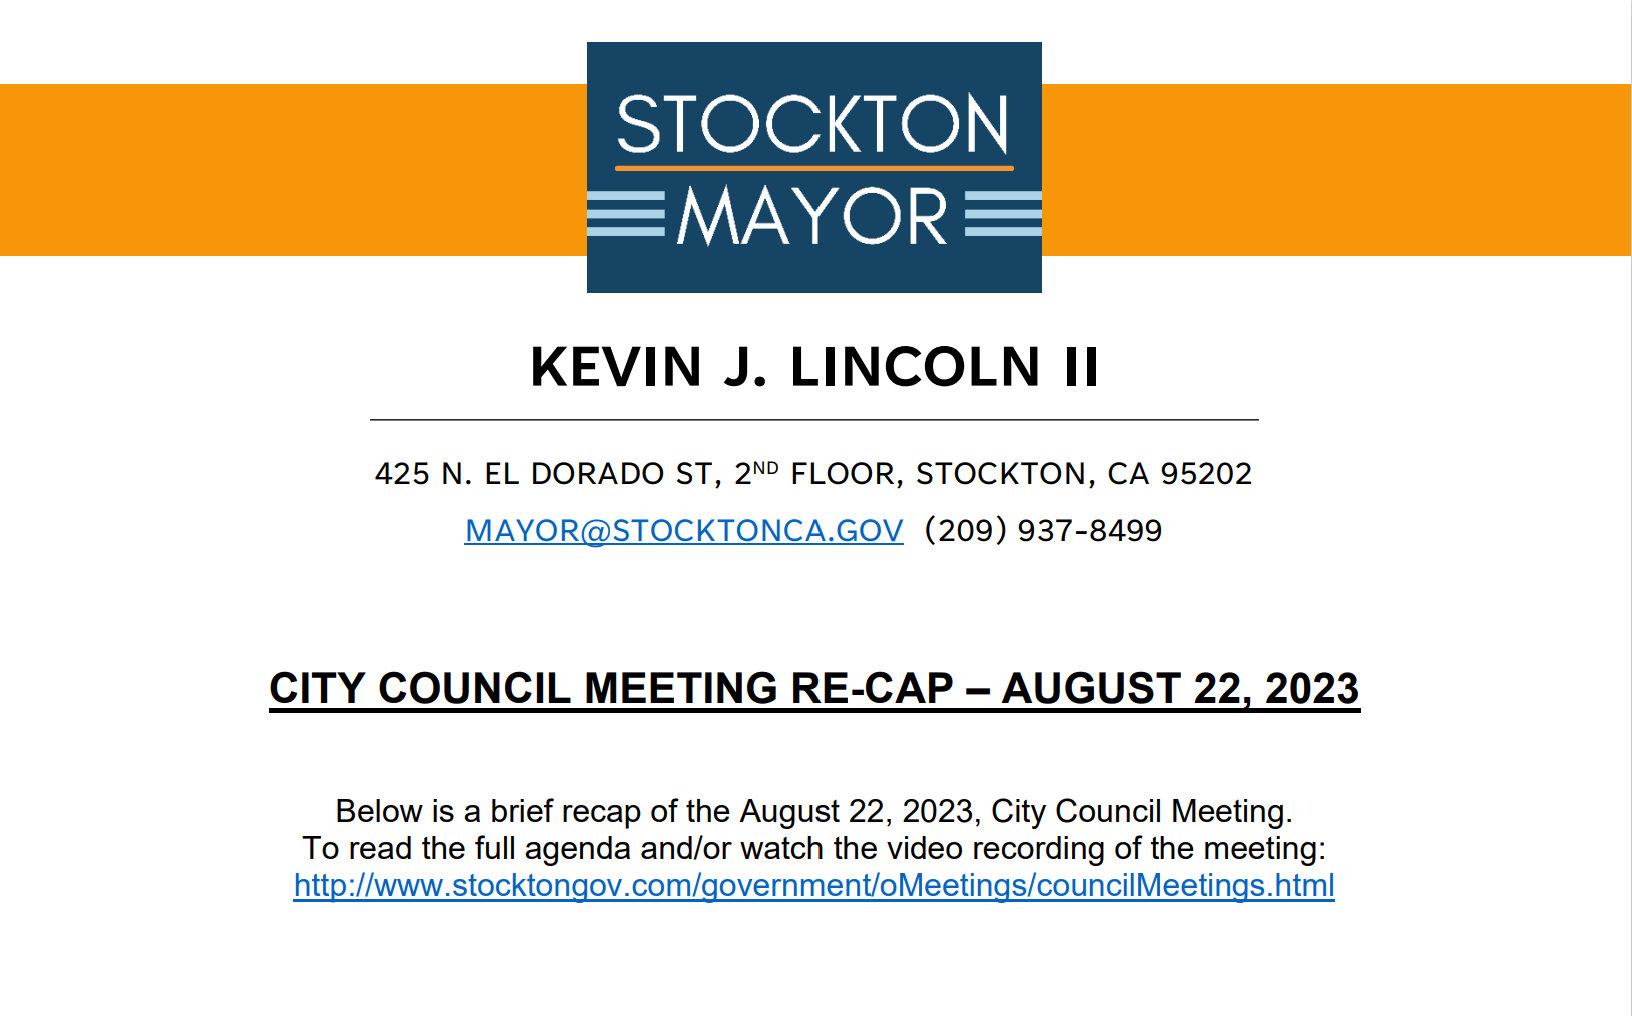 CITY COUNCIL MEETING RE-Cap - August 24TH, 2023